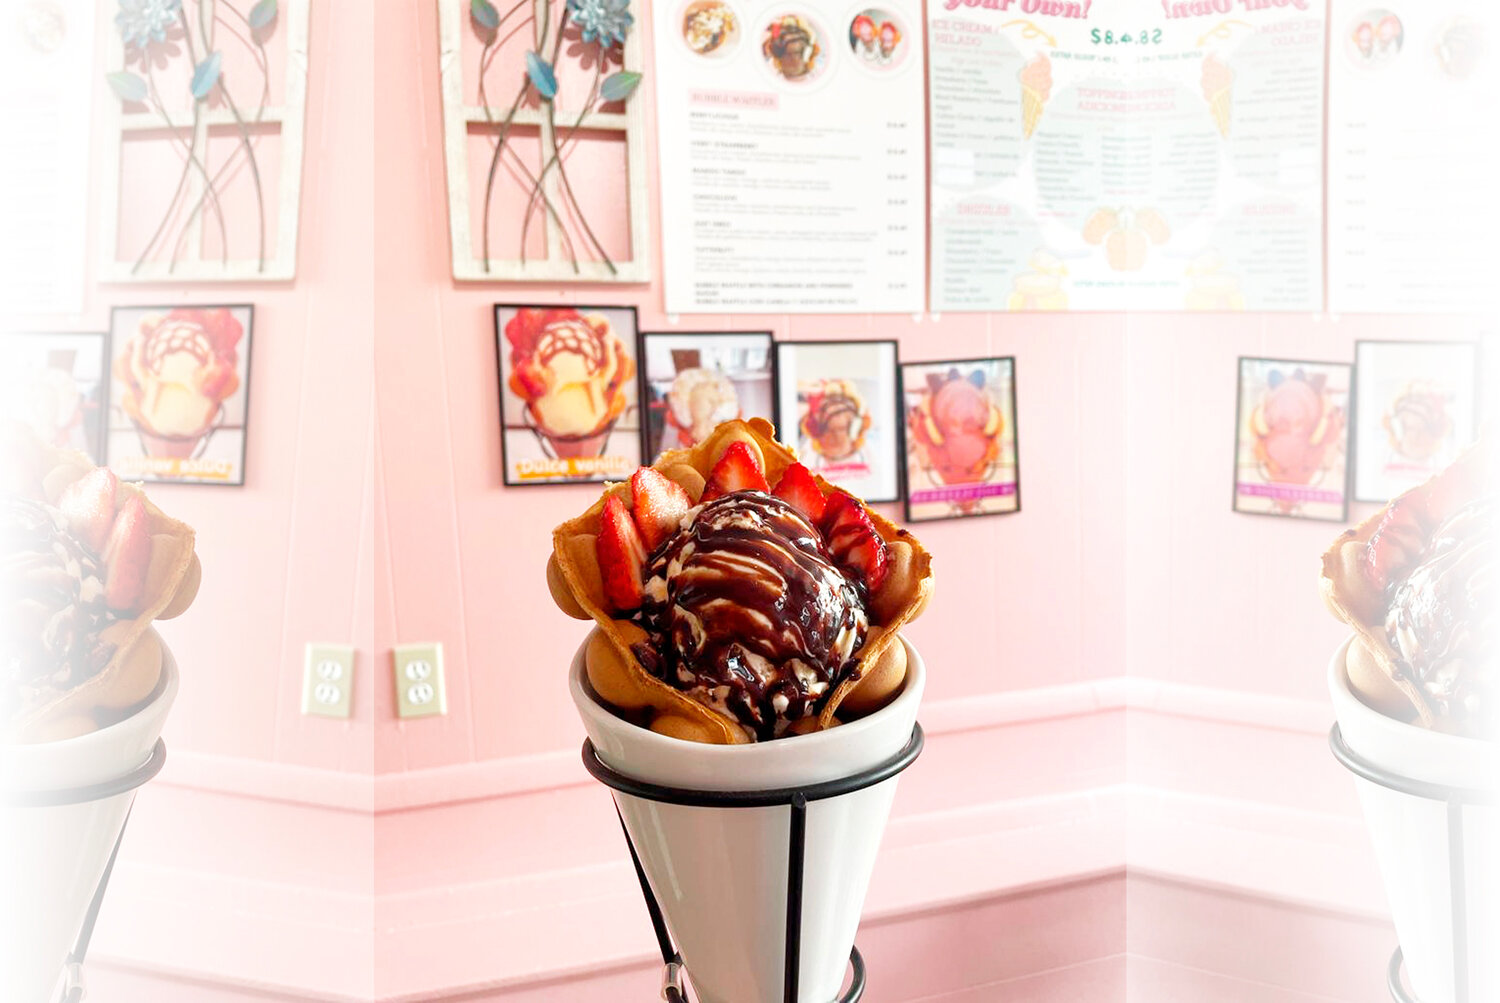 Bubble Waffle Cafe quickly became a destination for sweet scoops in Central Falls